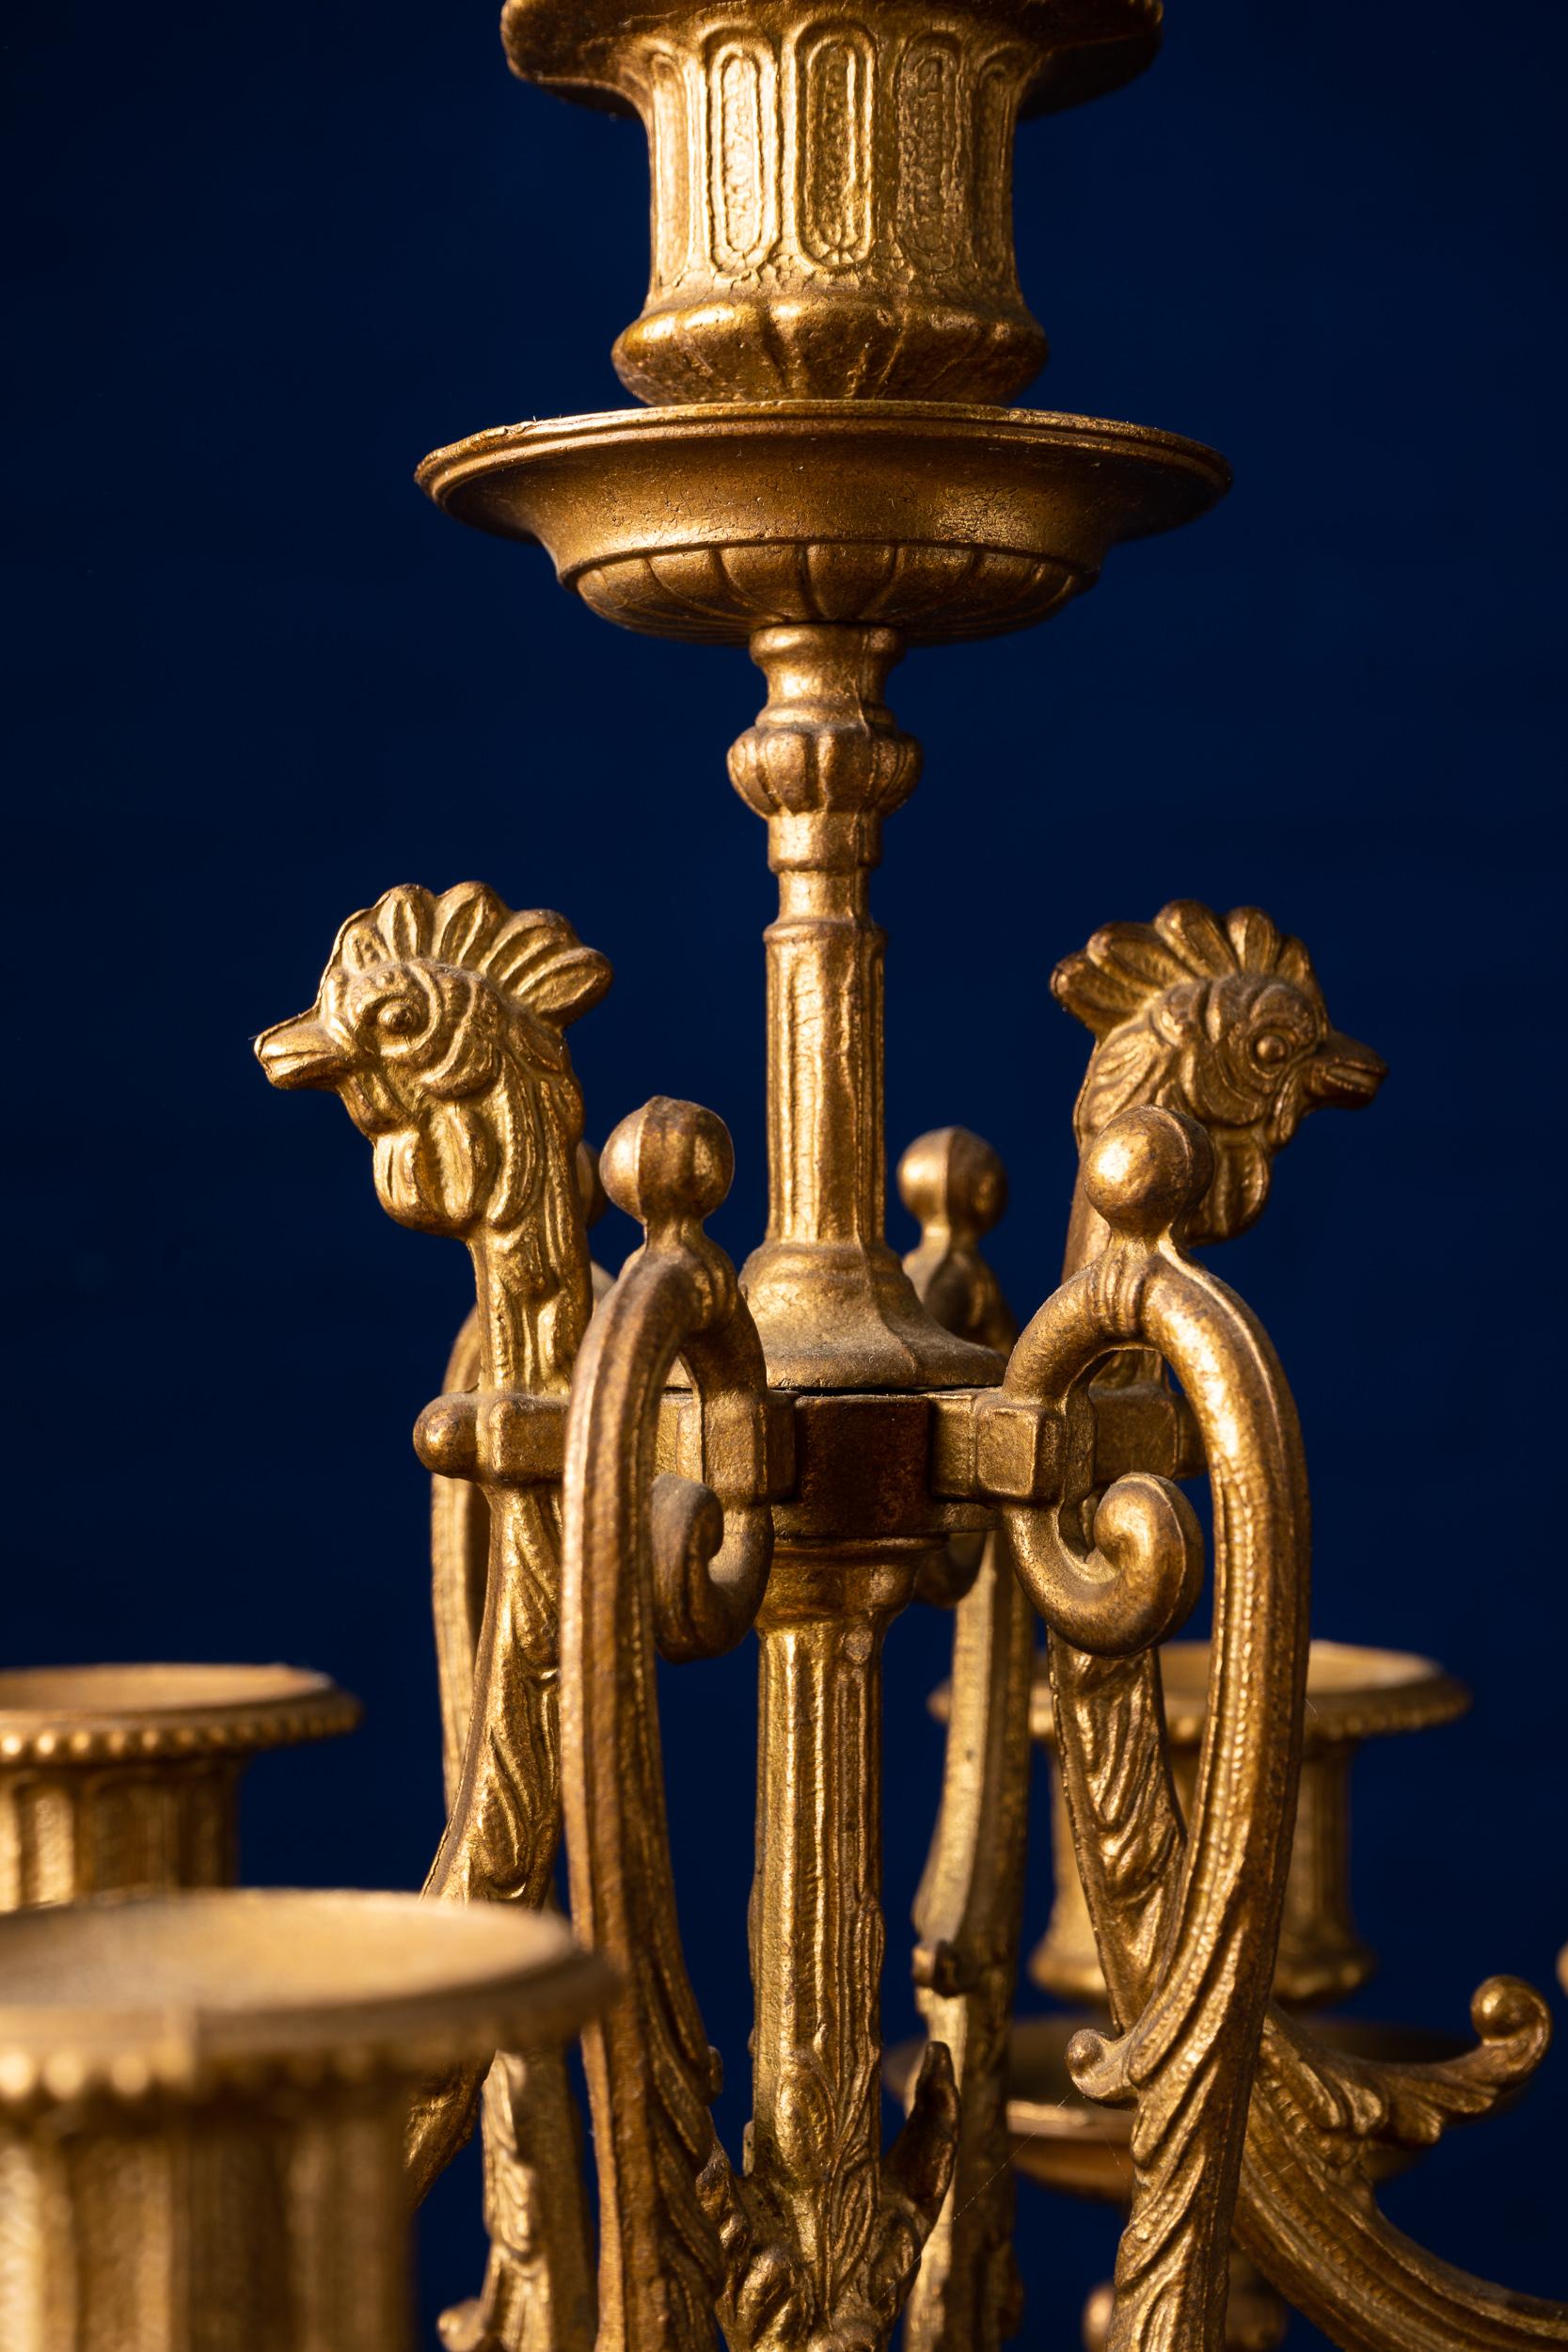 20th Century Classical and Opulent Pair of Rococo Ceramics and Copper Alloy Candleholders